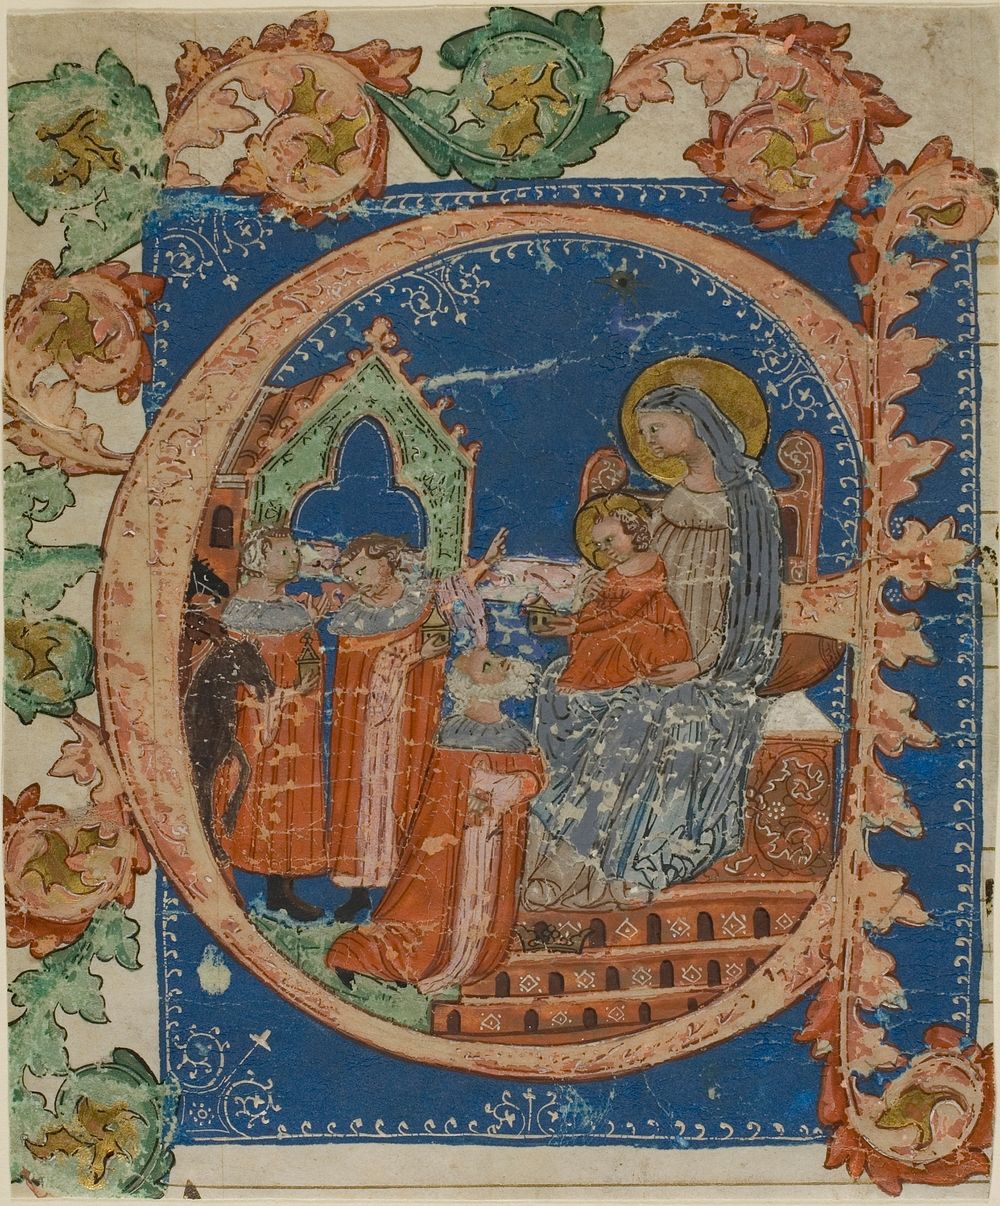 The Adoration of the Magi in a Historiated Initial "E" from a Choirbook